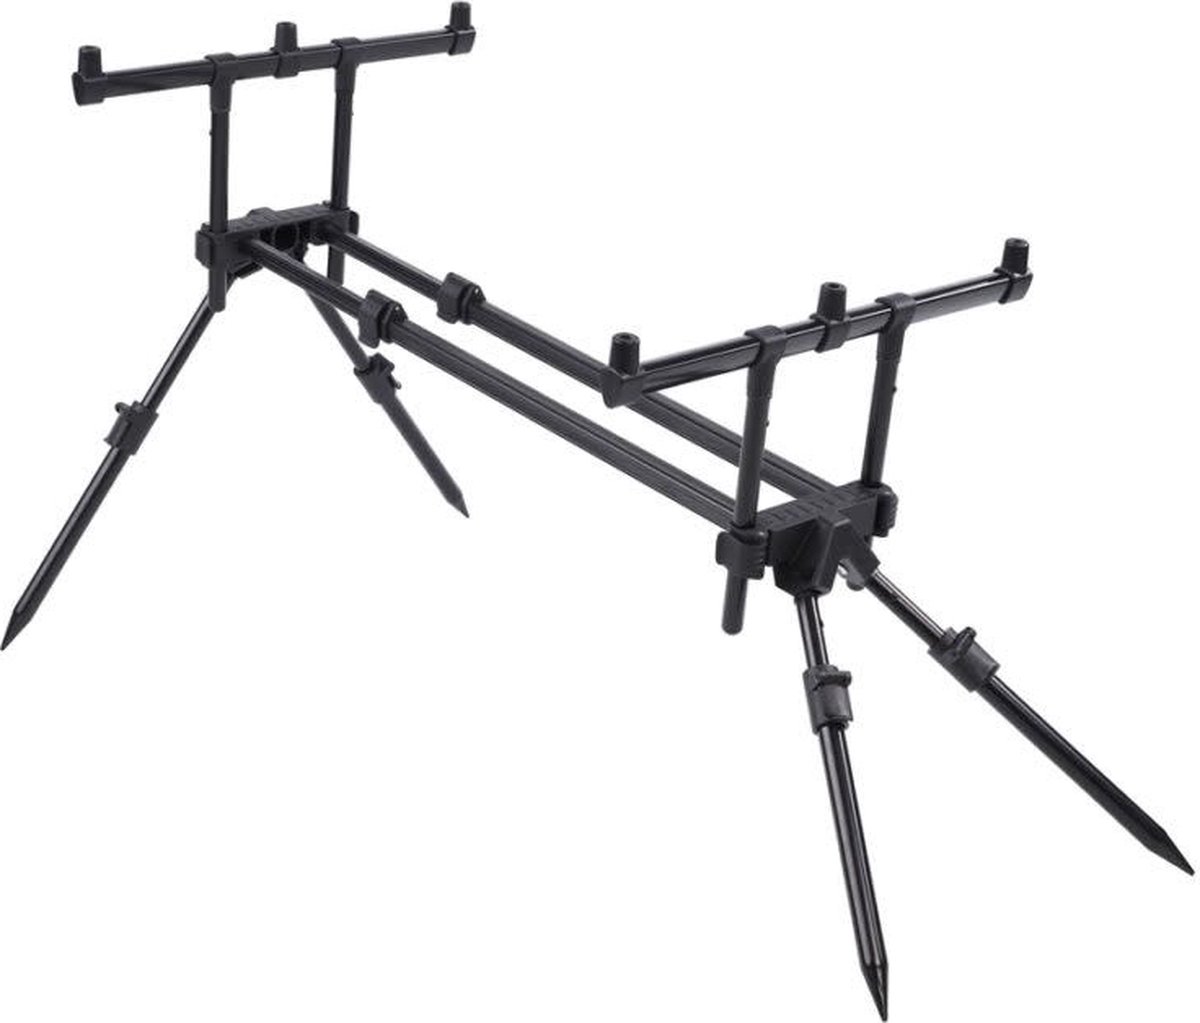 Prowess Rod Pod Scorpium Dual - Prowess